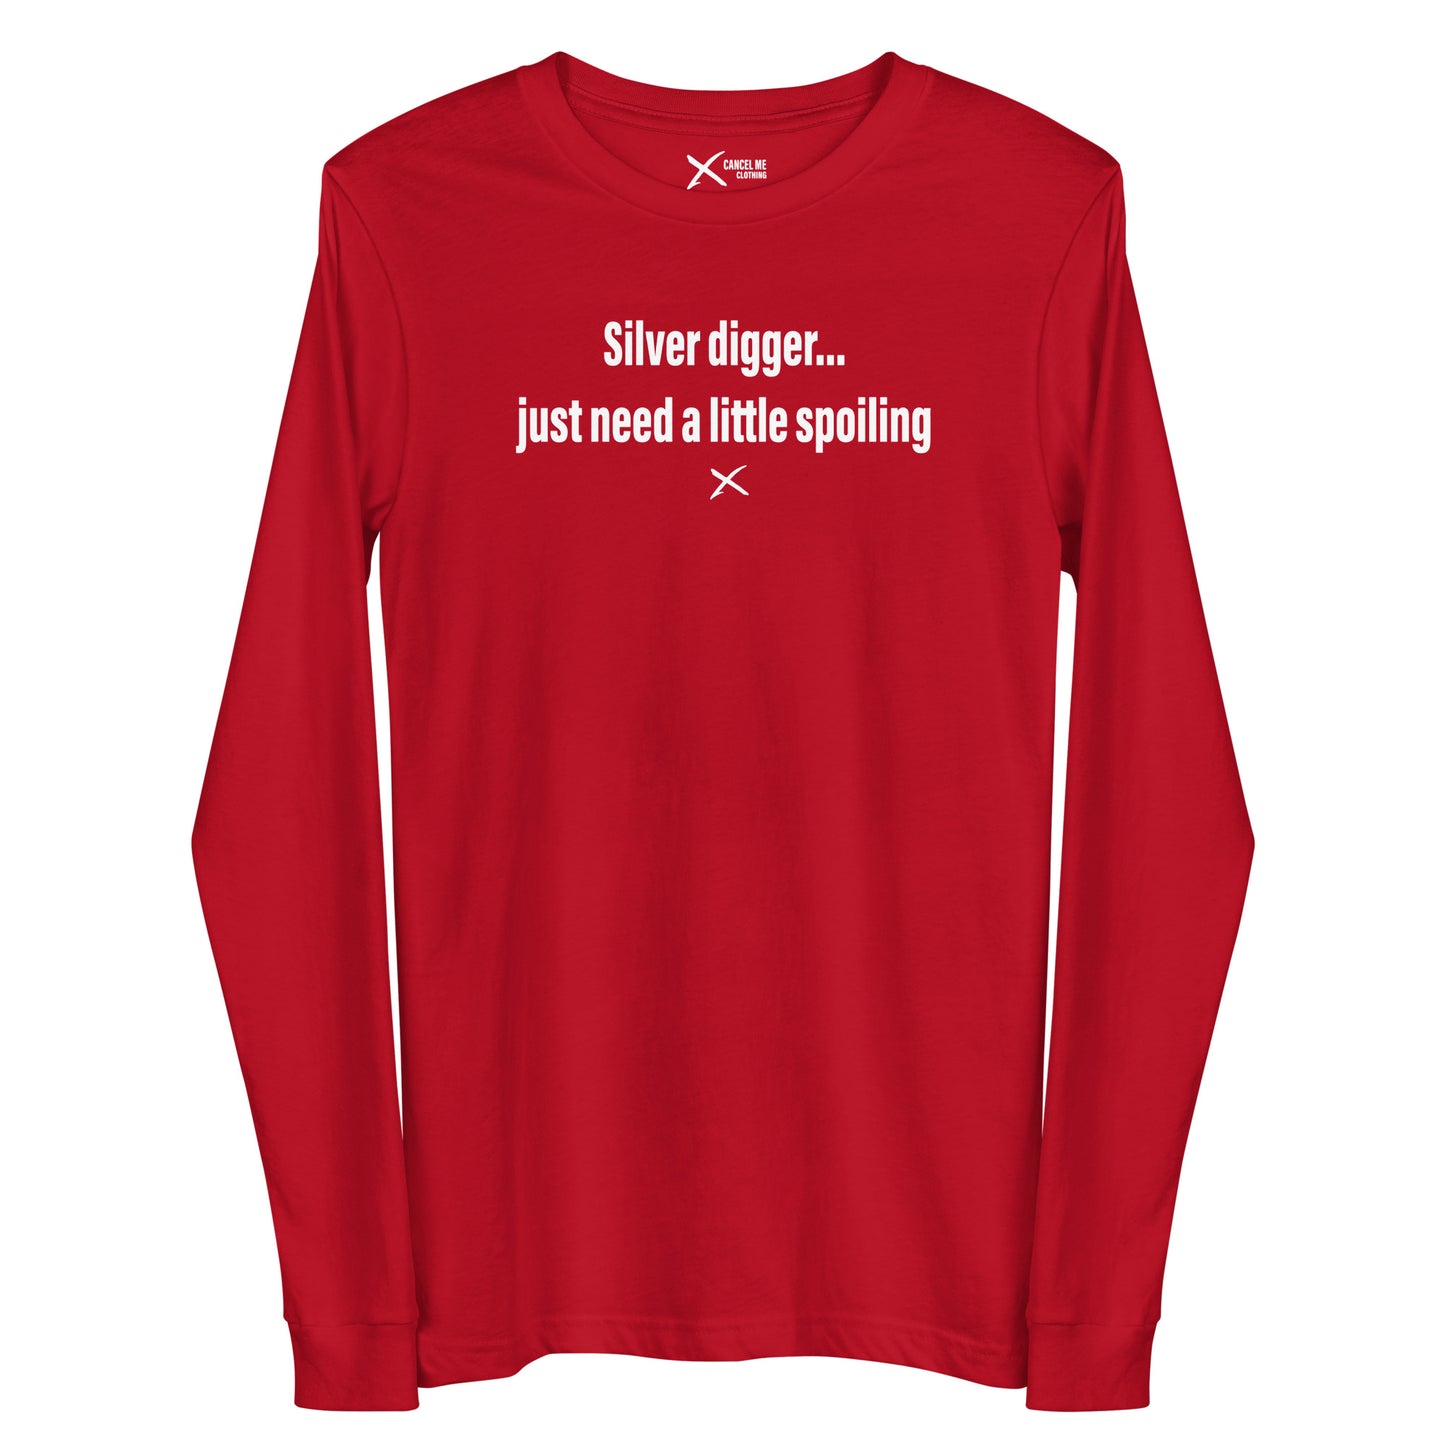 Silver digger... just need a little spoiling - Longsleeve